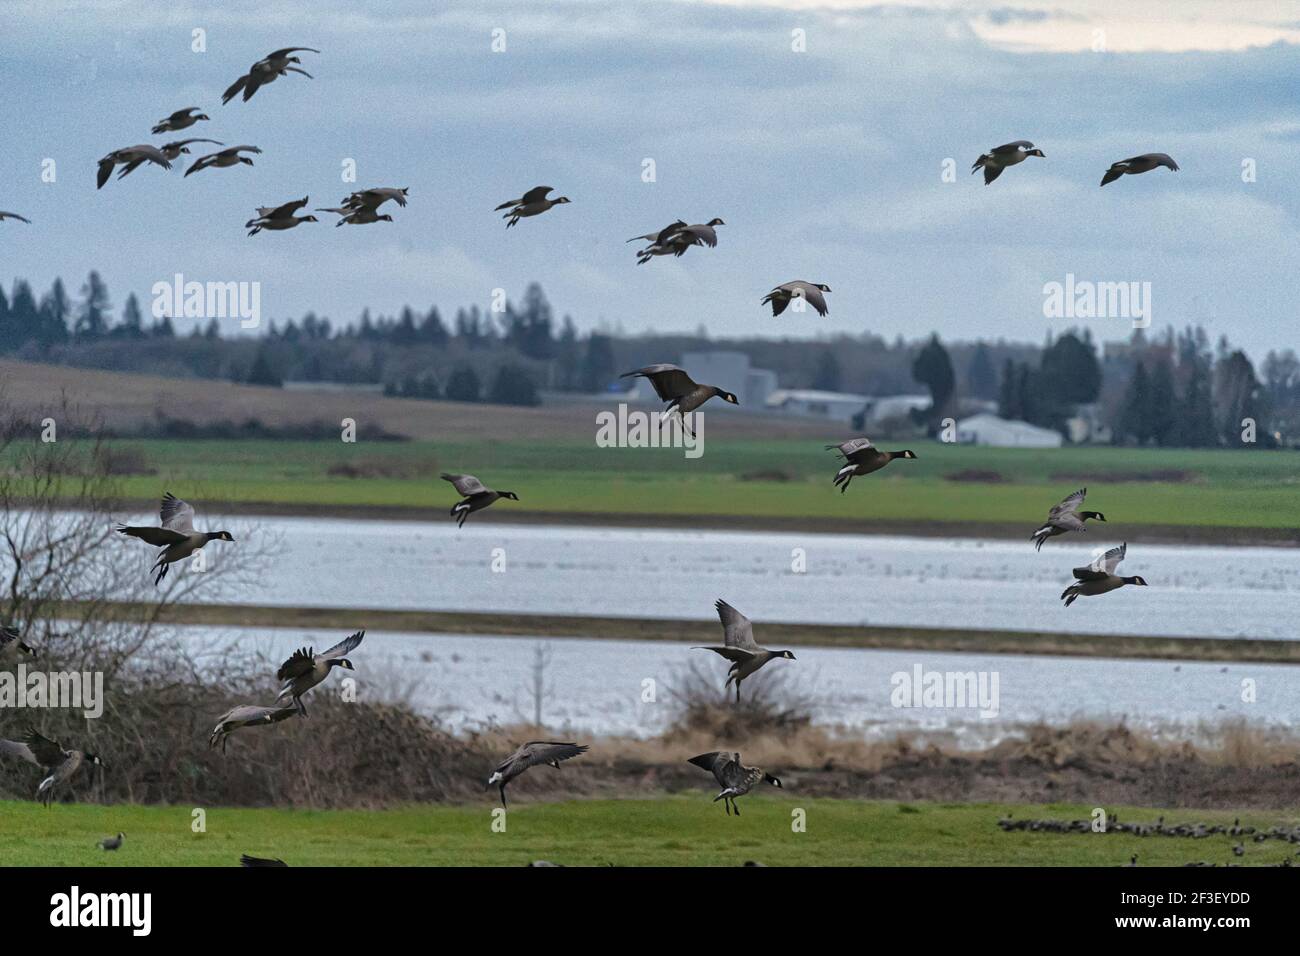 Canadian geese take flight in a wildlife preserve Stock Photo